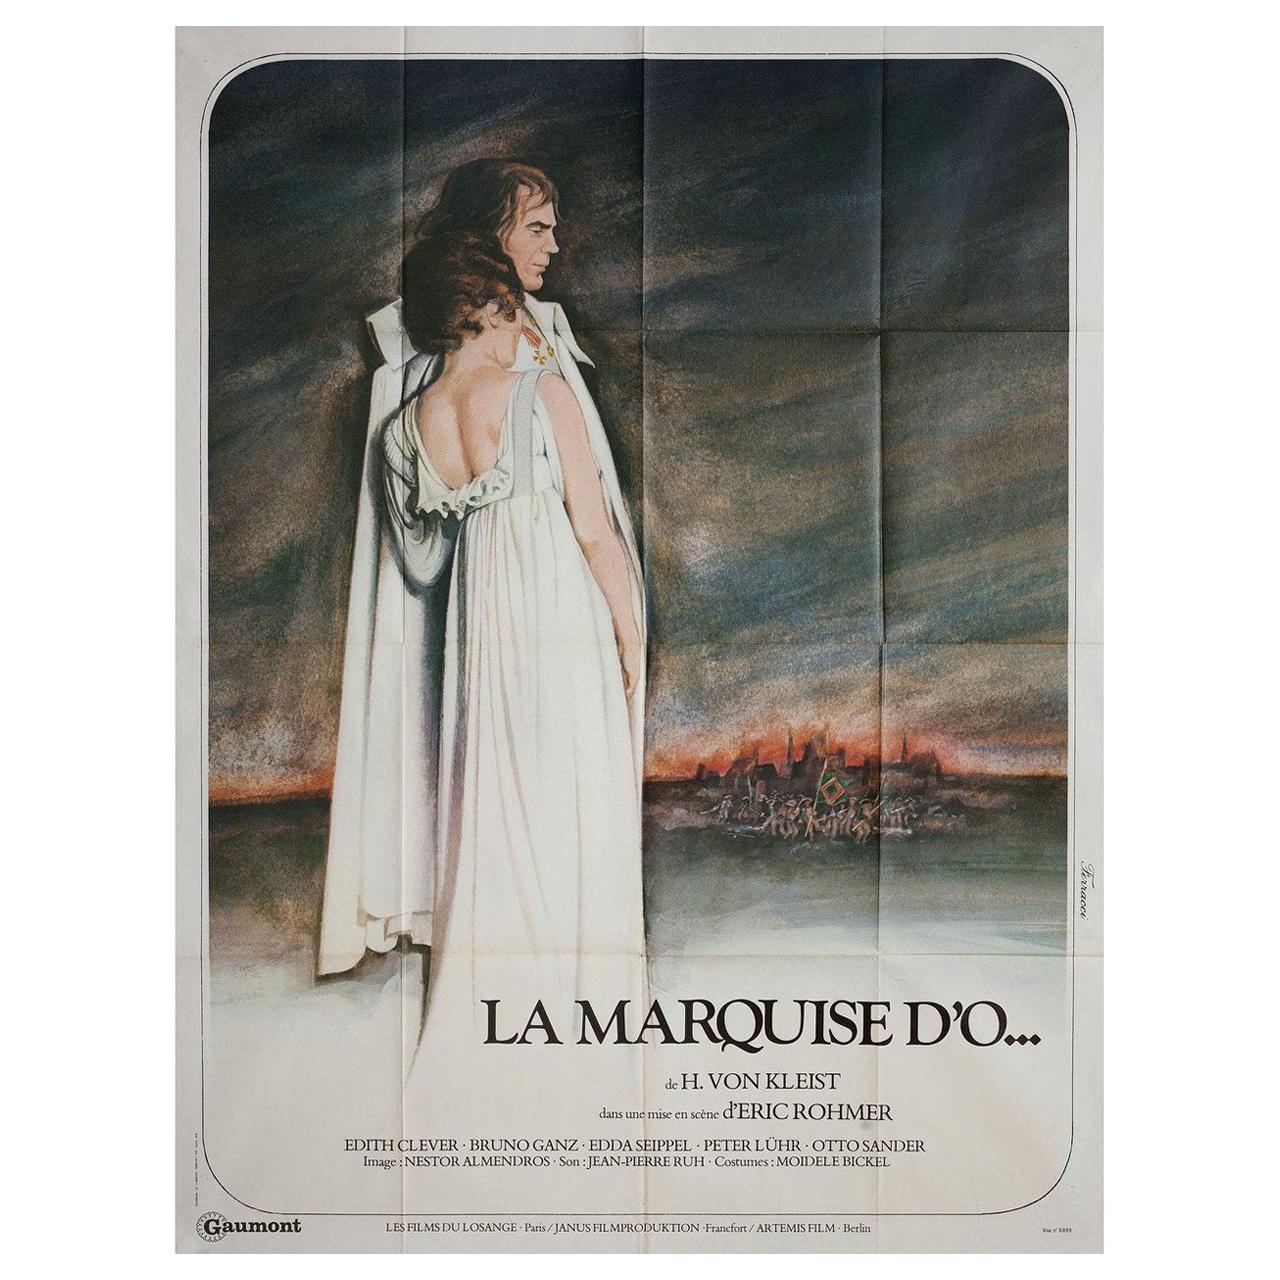 The Marquise of O 1976 French Grande Film Poster